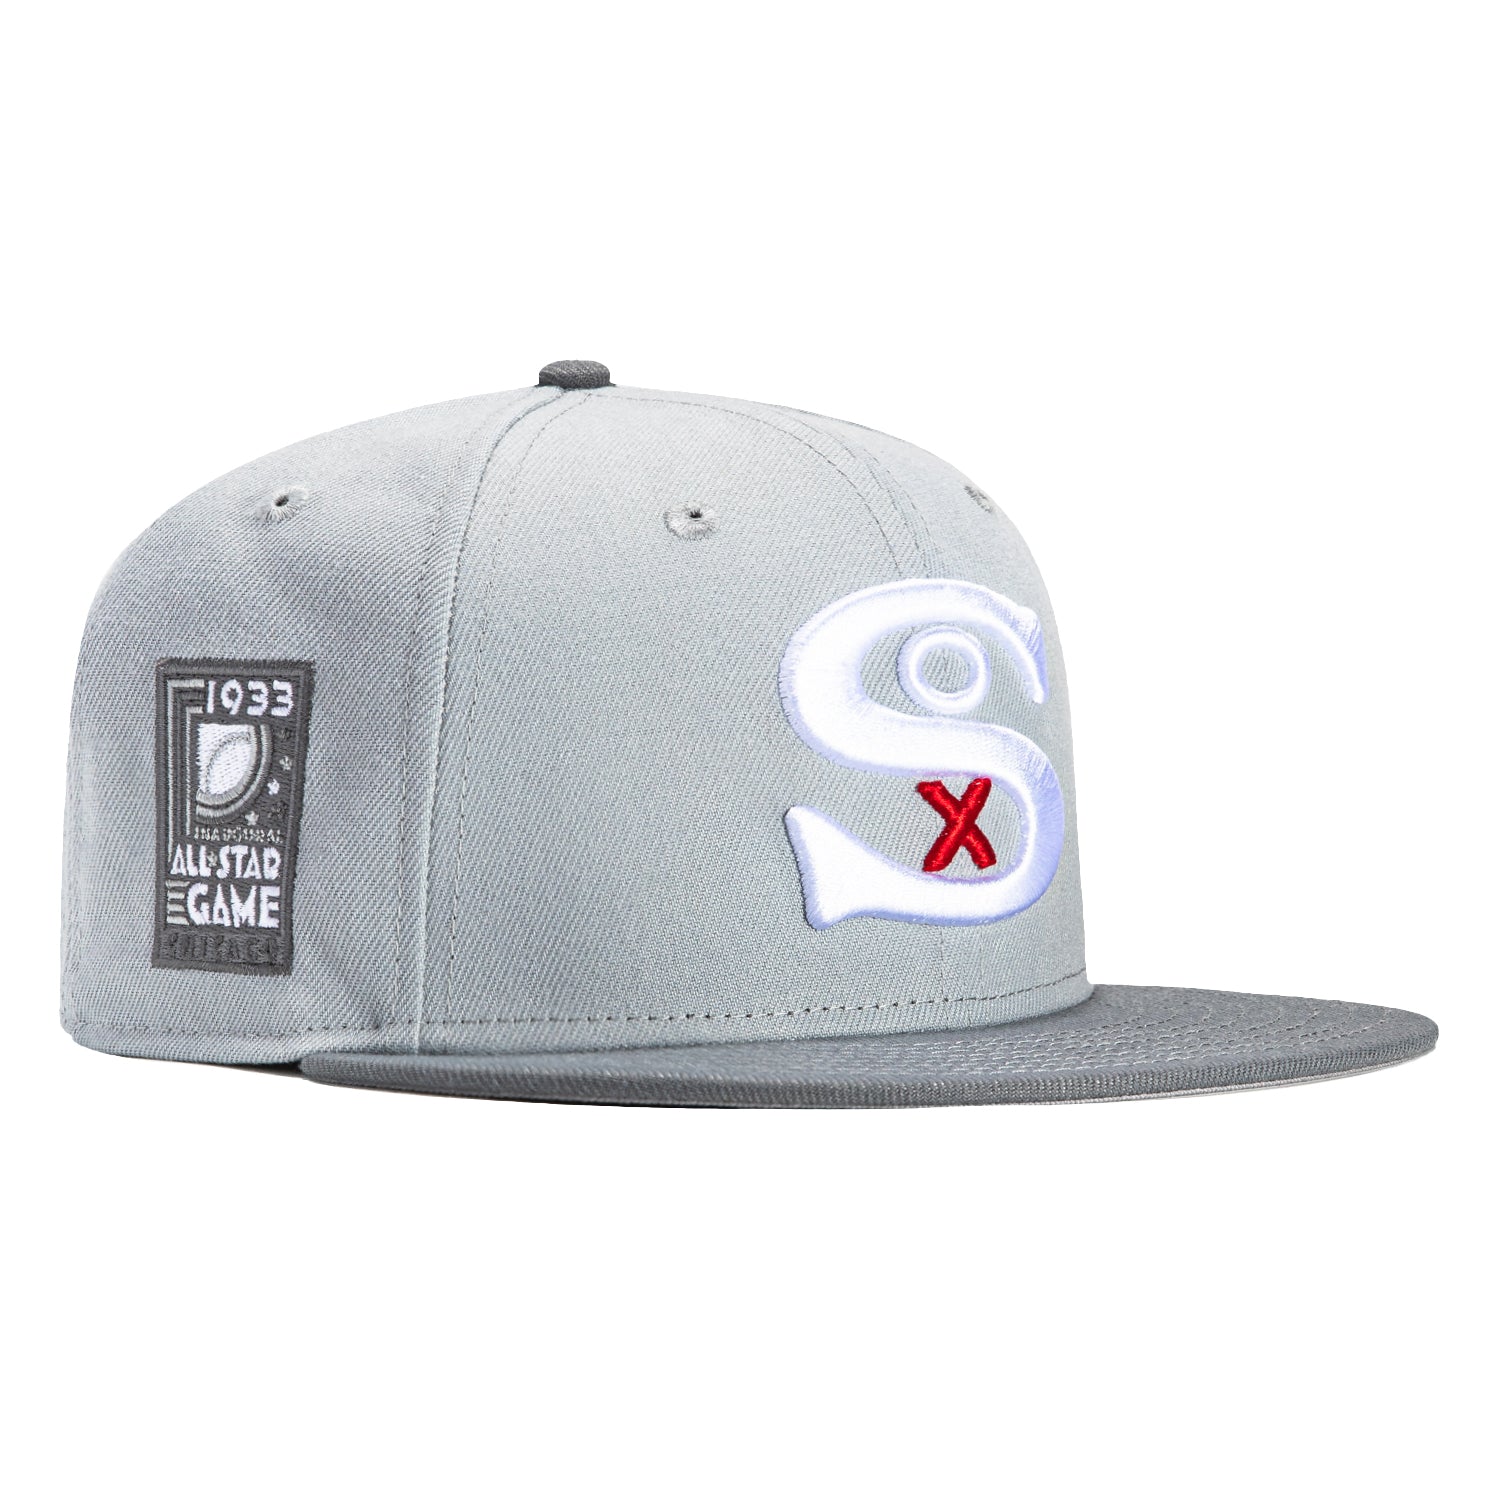 New Era 59Fifty Chicago White Sox 1933 All Star Game Patch Hat - Grey, – Hat  Club